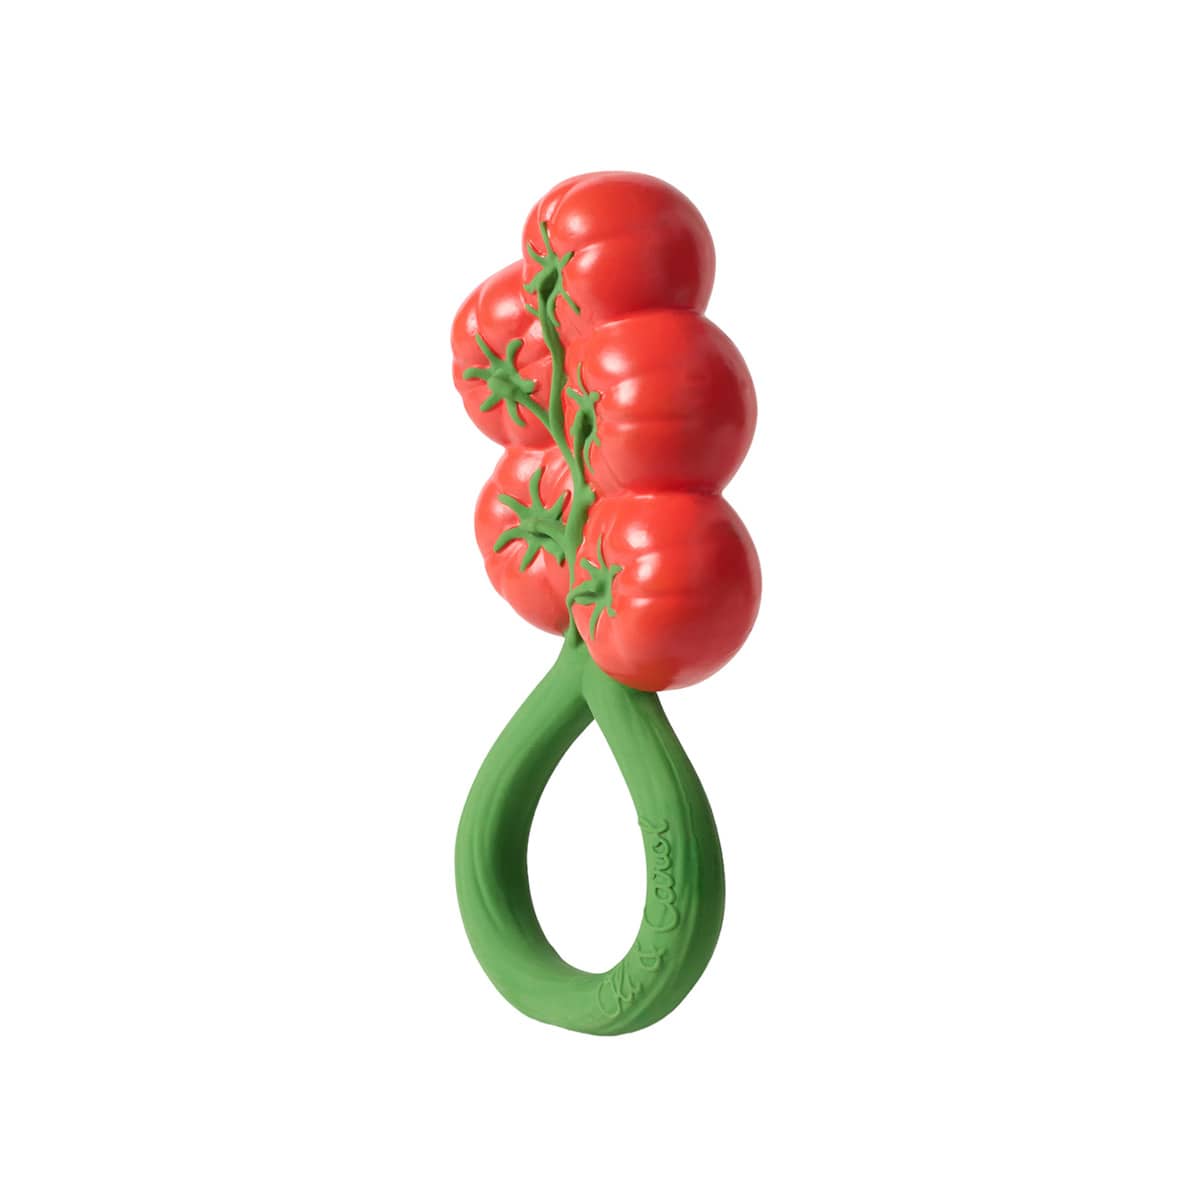 Oli & Carol 2 in 1 Rattle Toy and Teether - Tomato